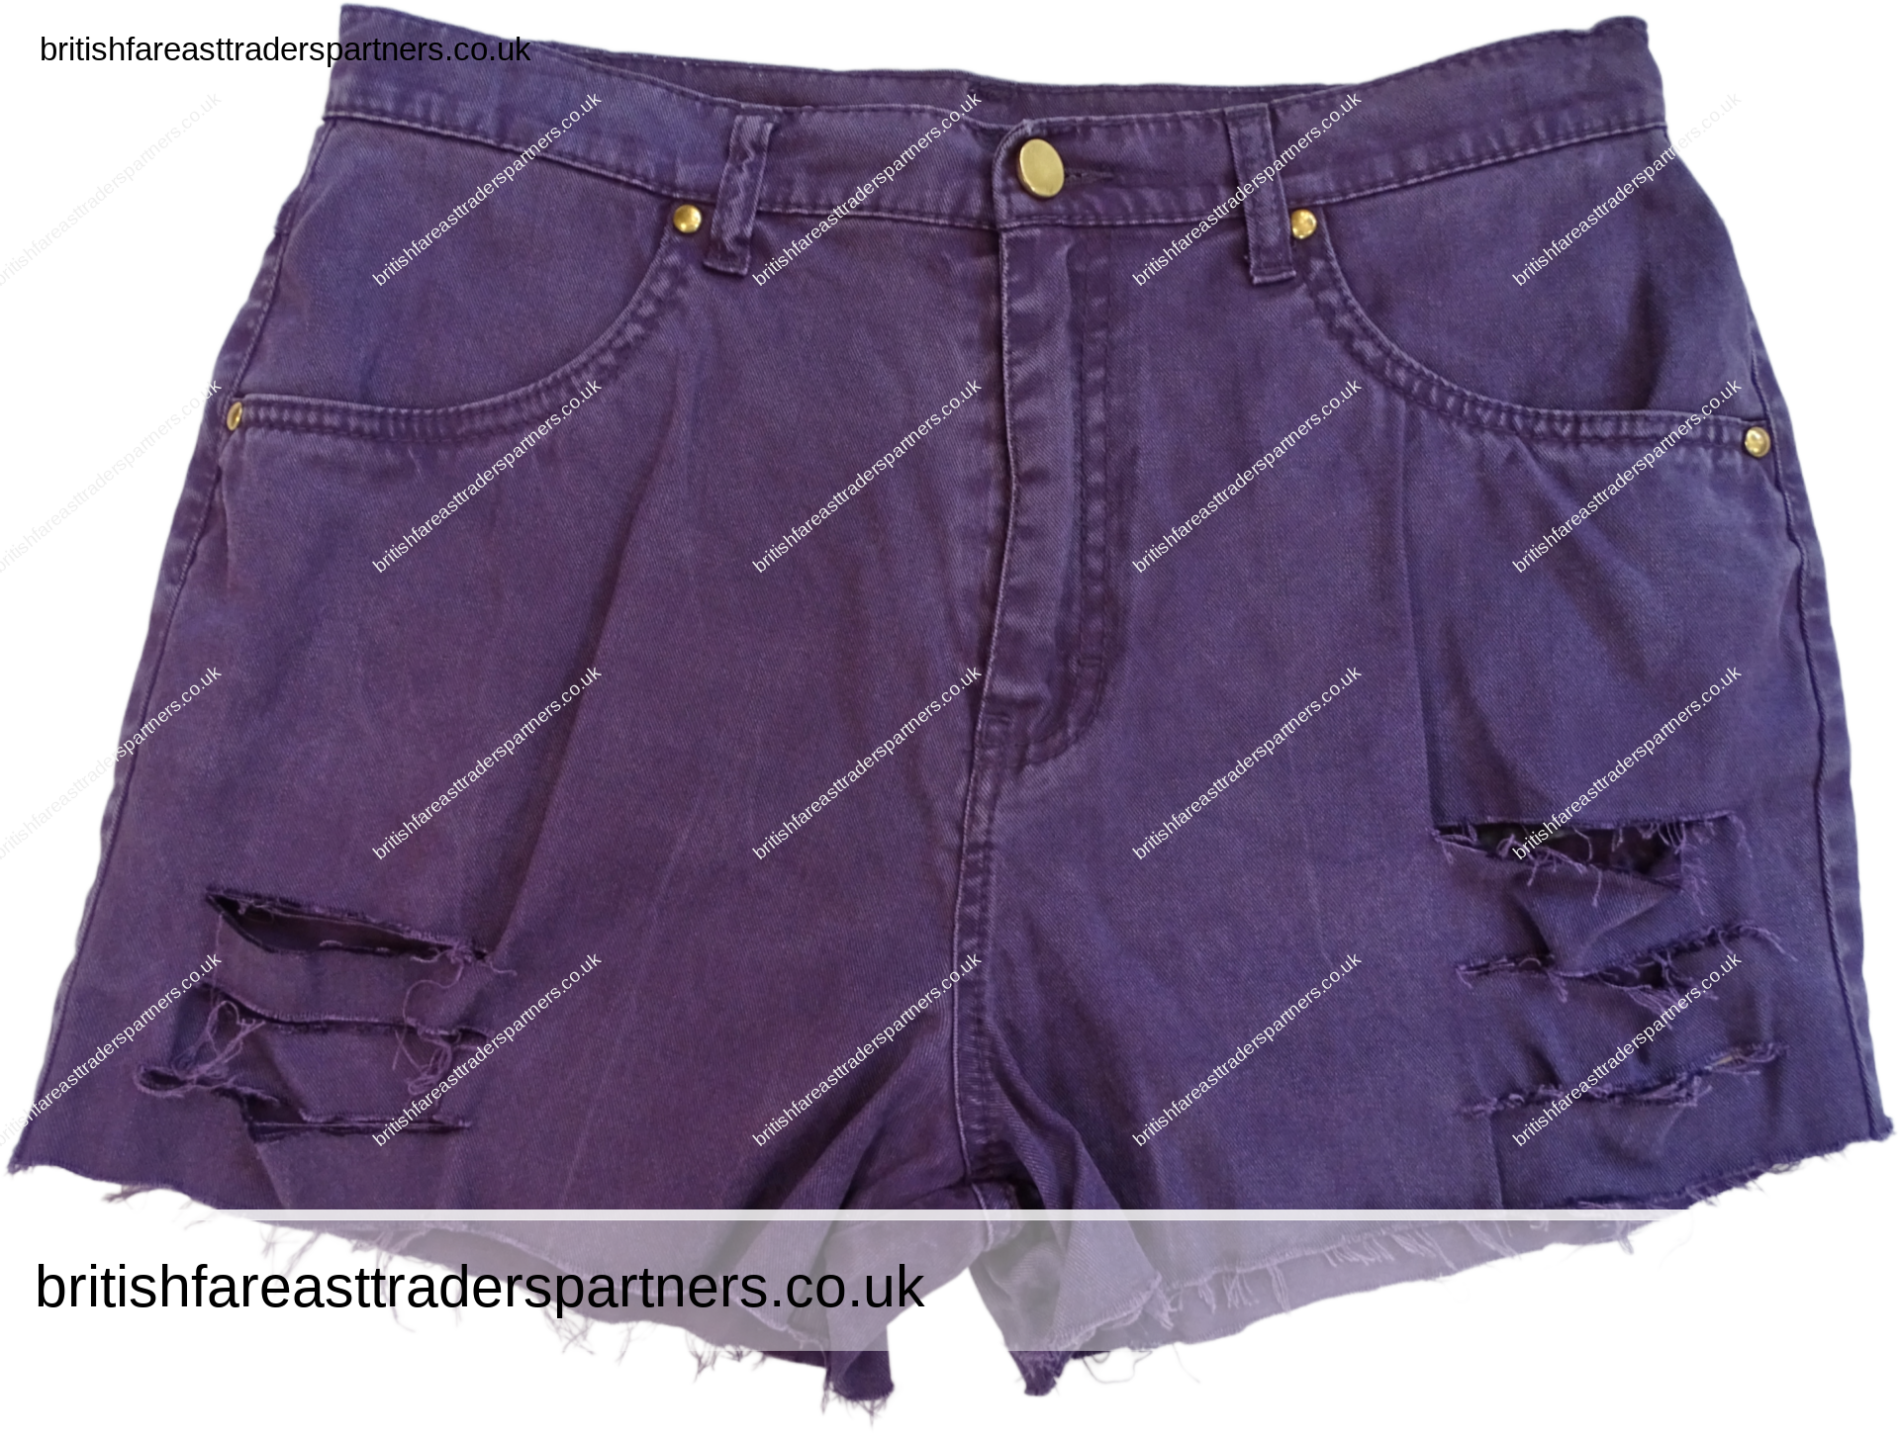 WOMEN’S LADIES UPCYCLED DENIM SHORTS “MARKS & SPENCER PURPLE” DISTRESSED / DESTROYED / RIPPED FASHION | CULTURE | LIFESTYLE